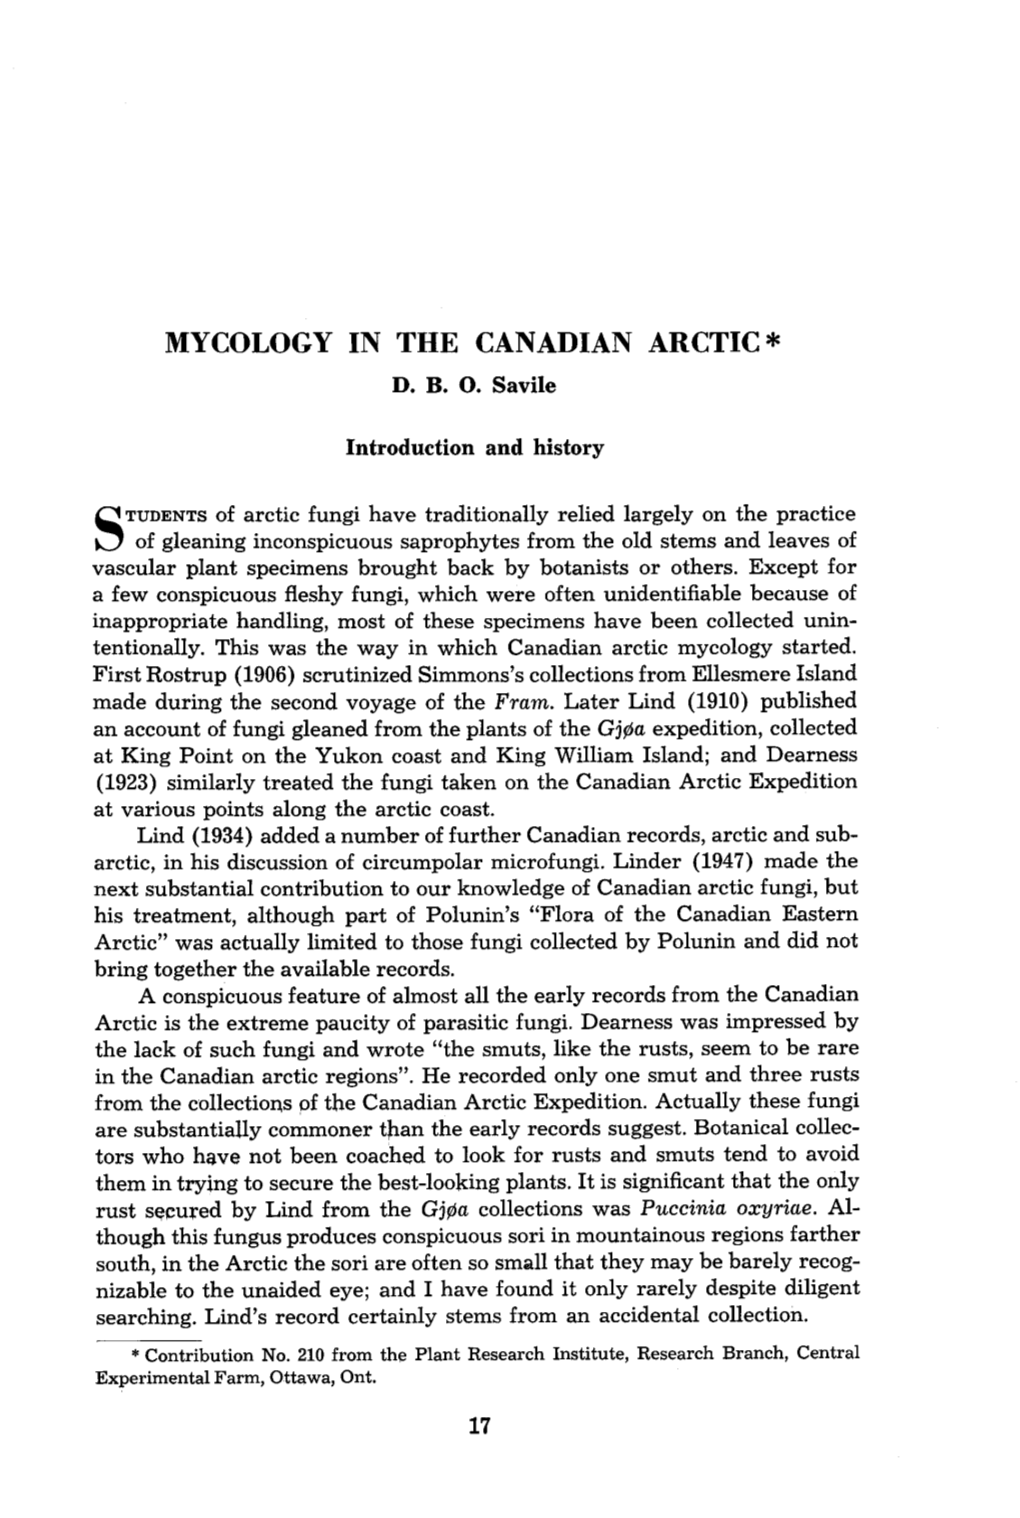 Mycology in the Canadian Arctic